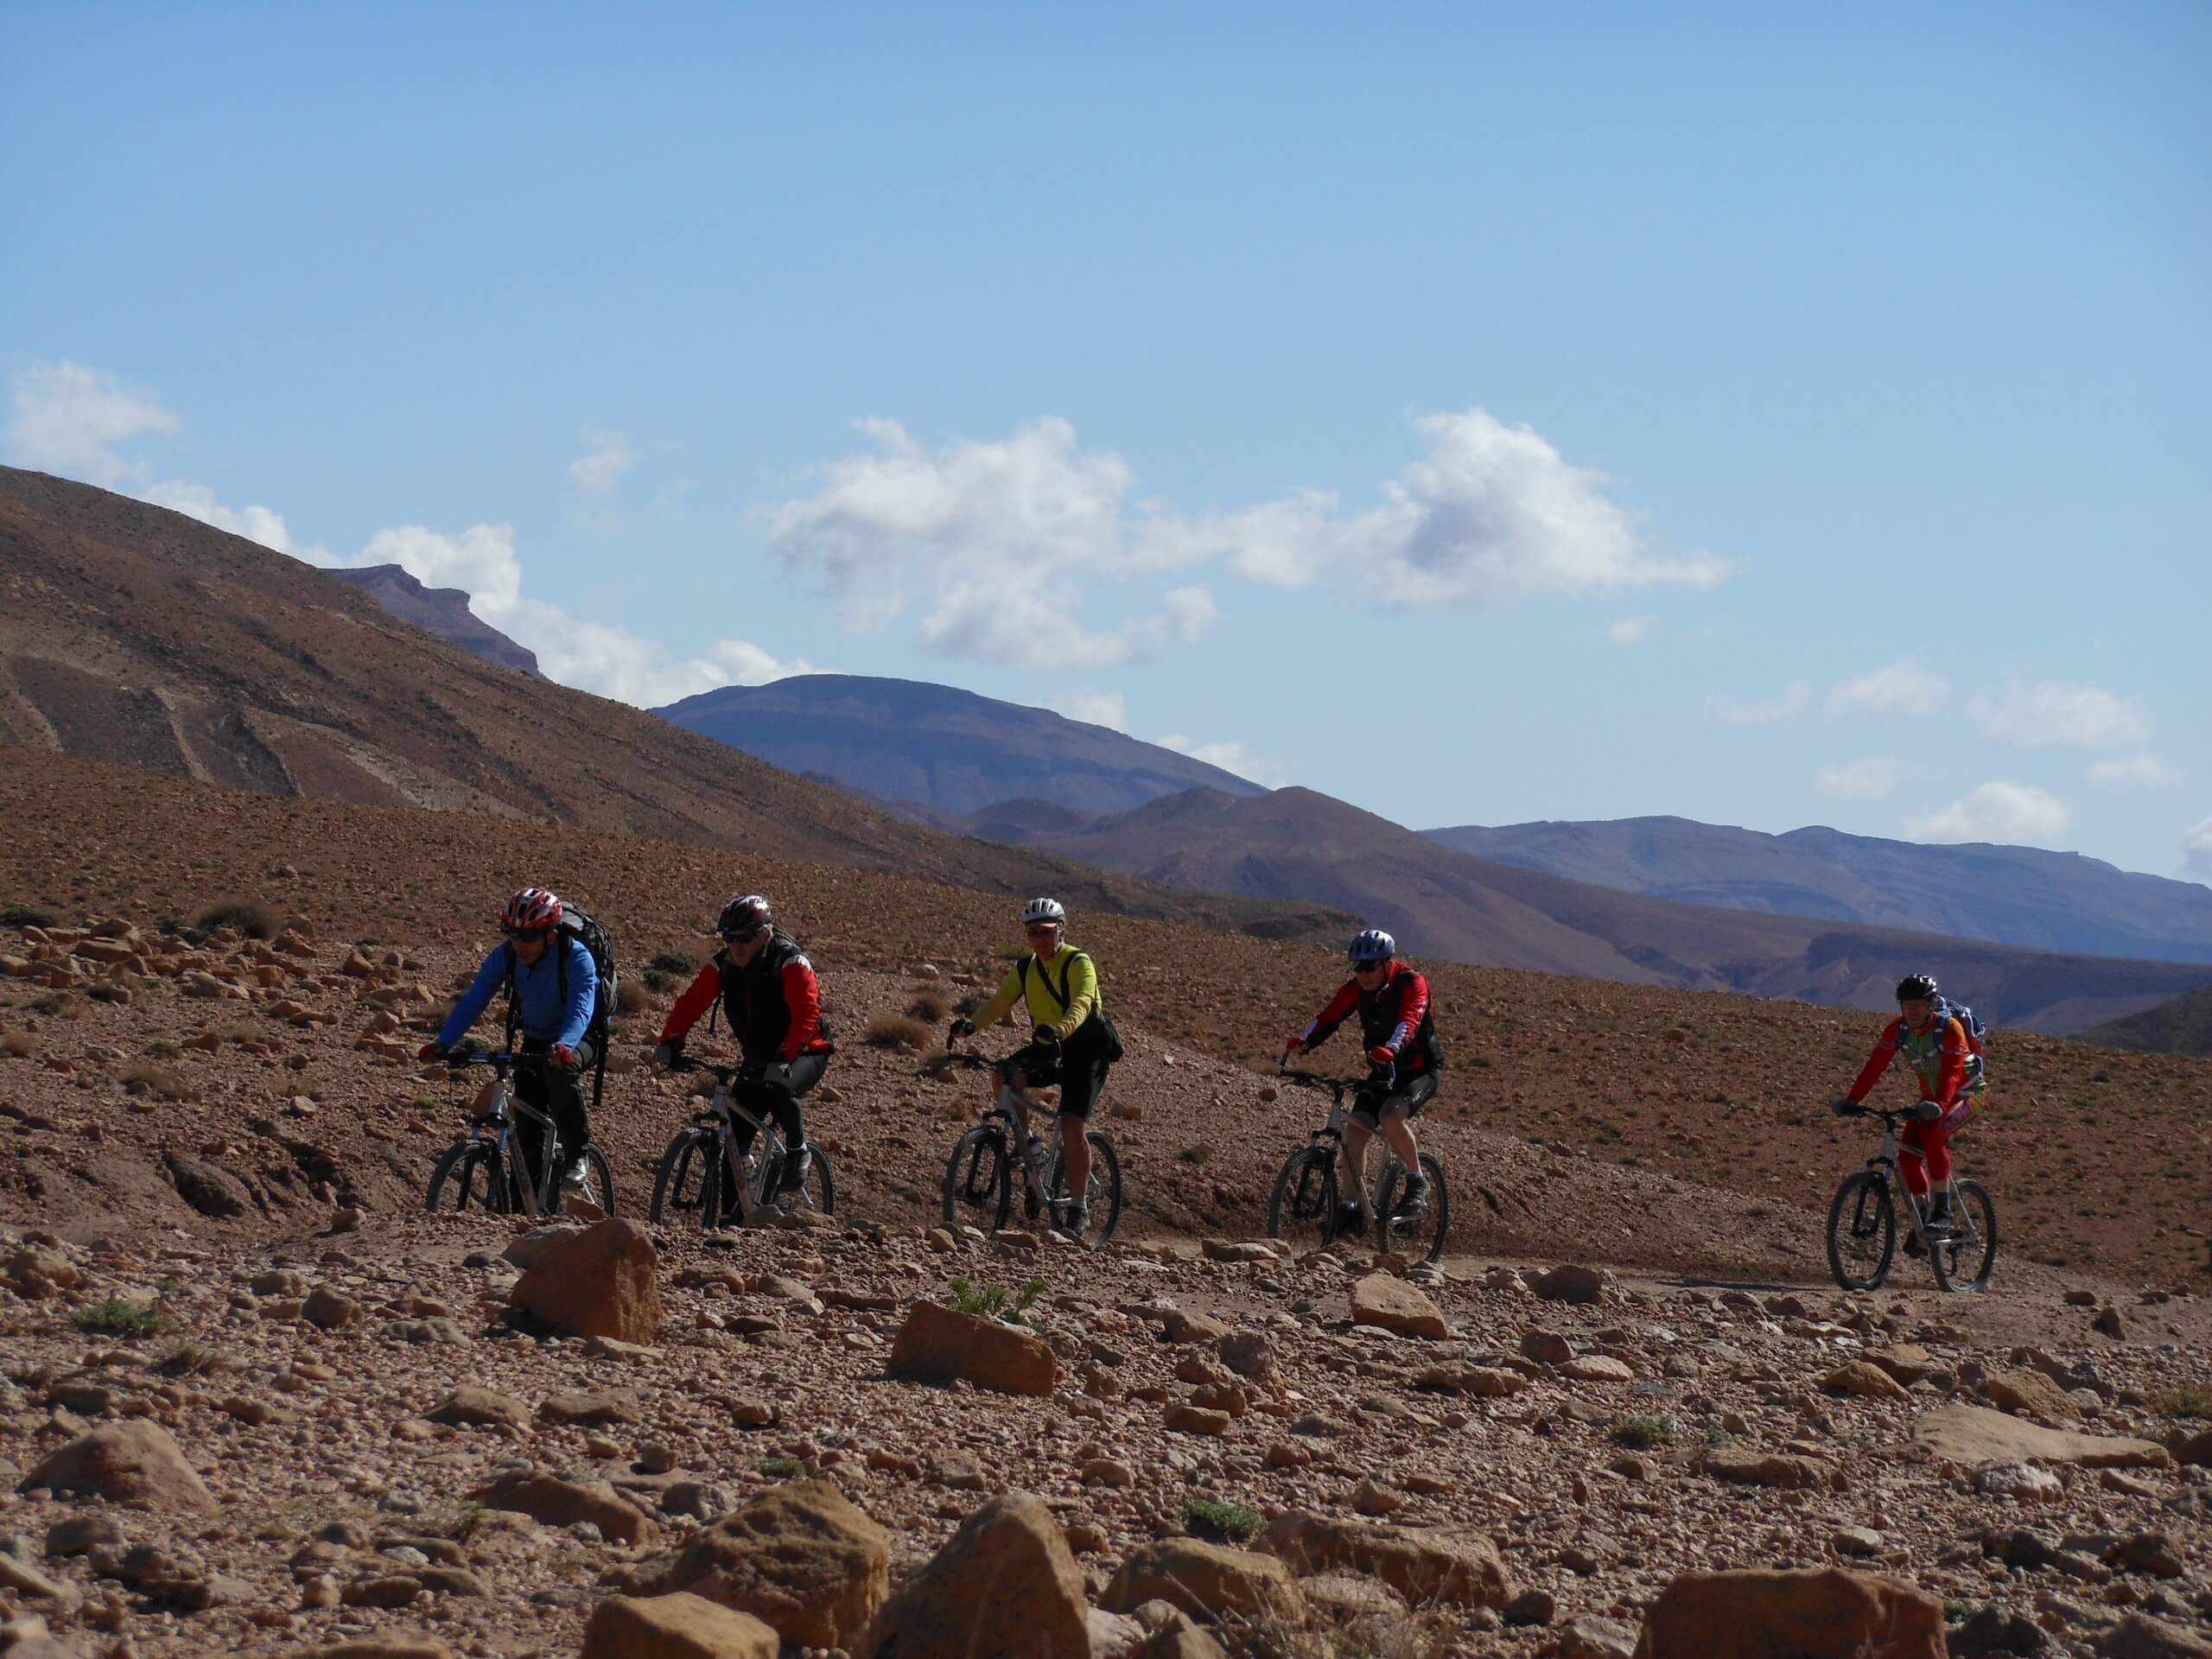 Group of mountain bikers riding the path in Saghro, Morocco